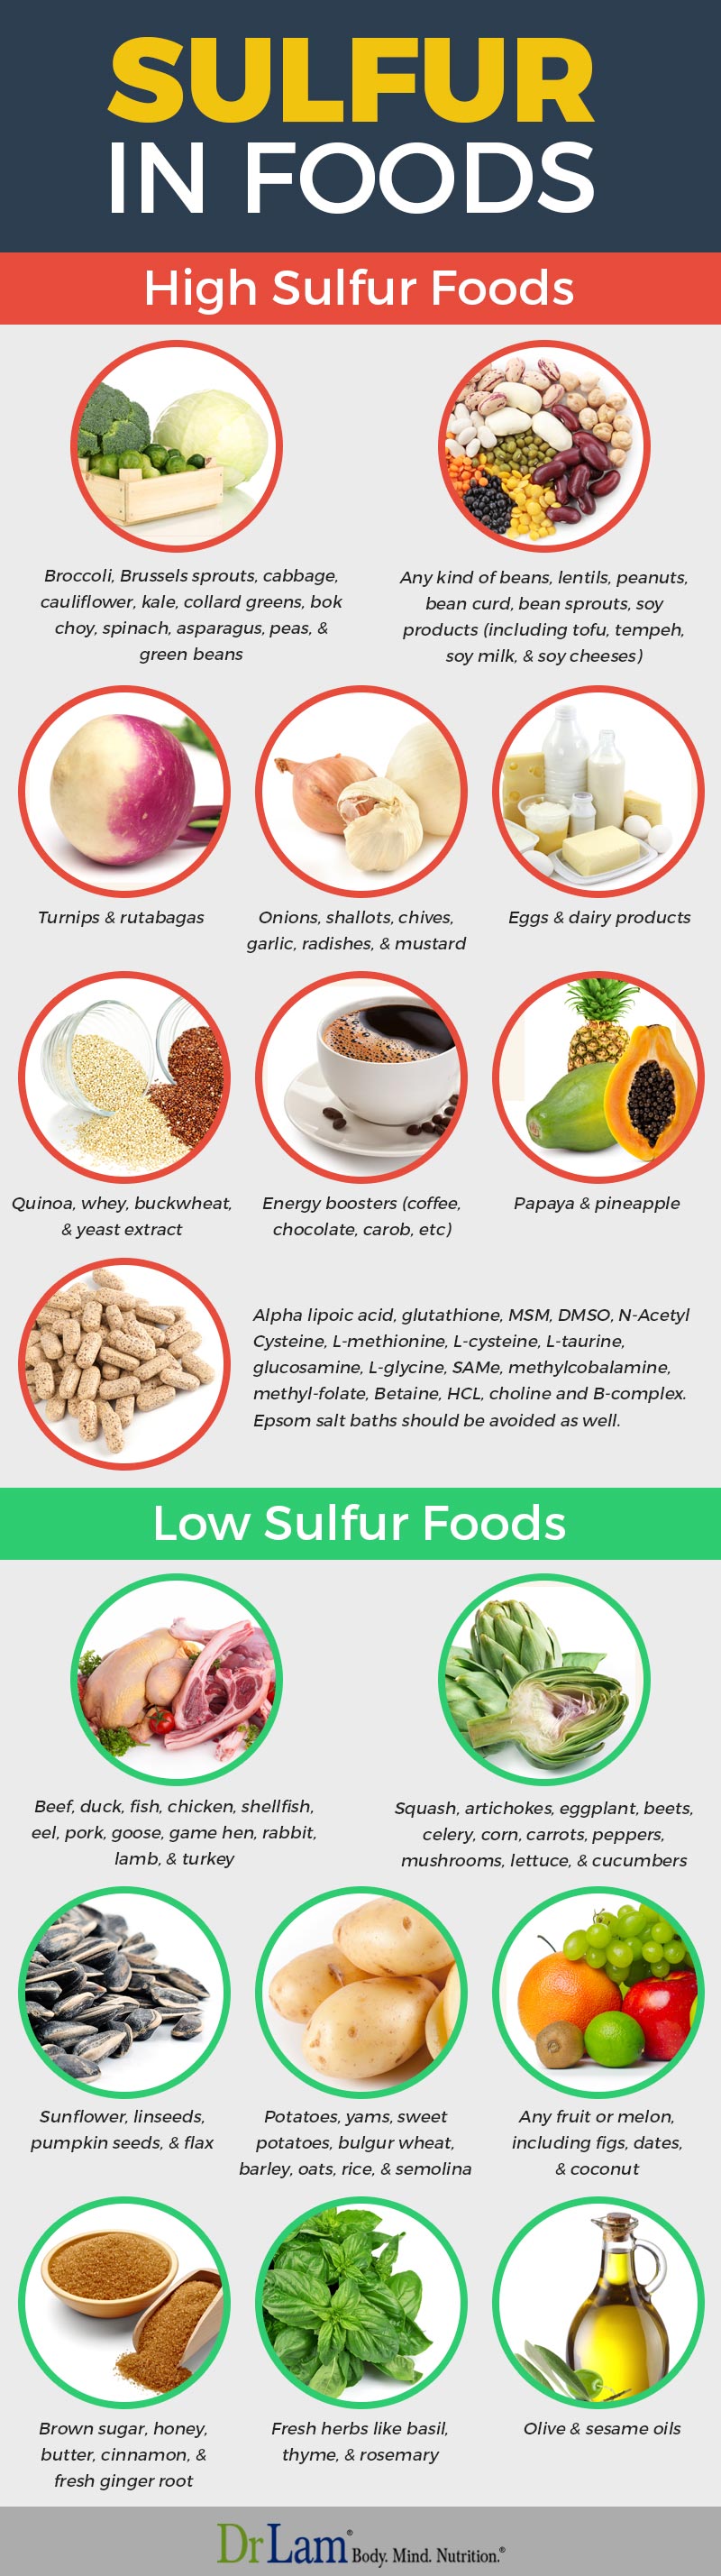 Check out this easy to understand infographic about foods low and foods high in sulfur